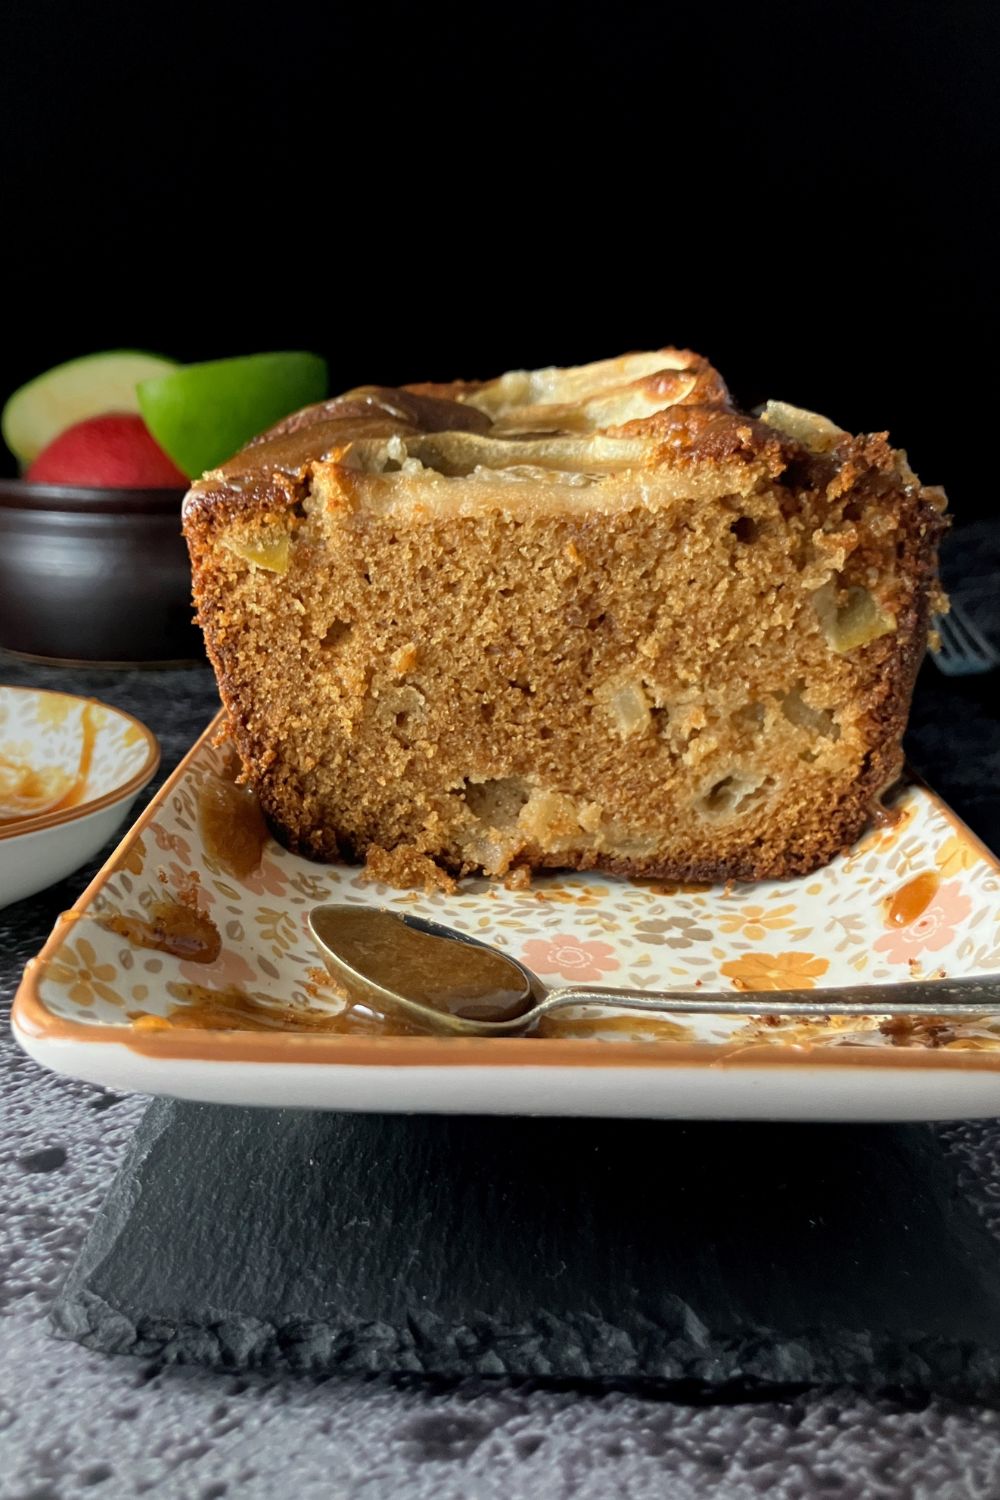 Apple and Ginger Cake (with Coconut Sugar Caramel)